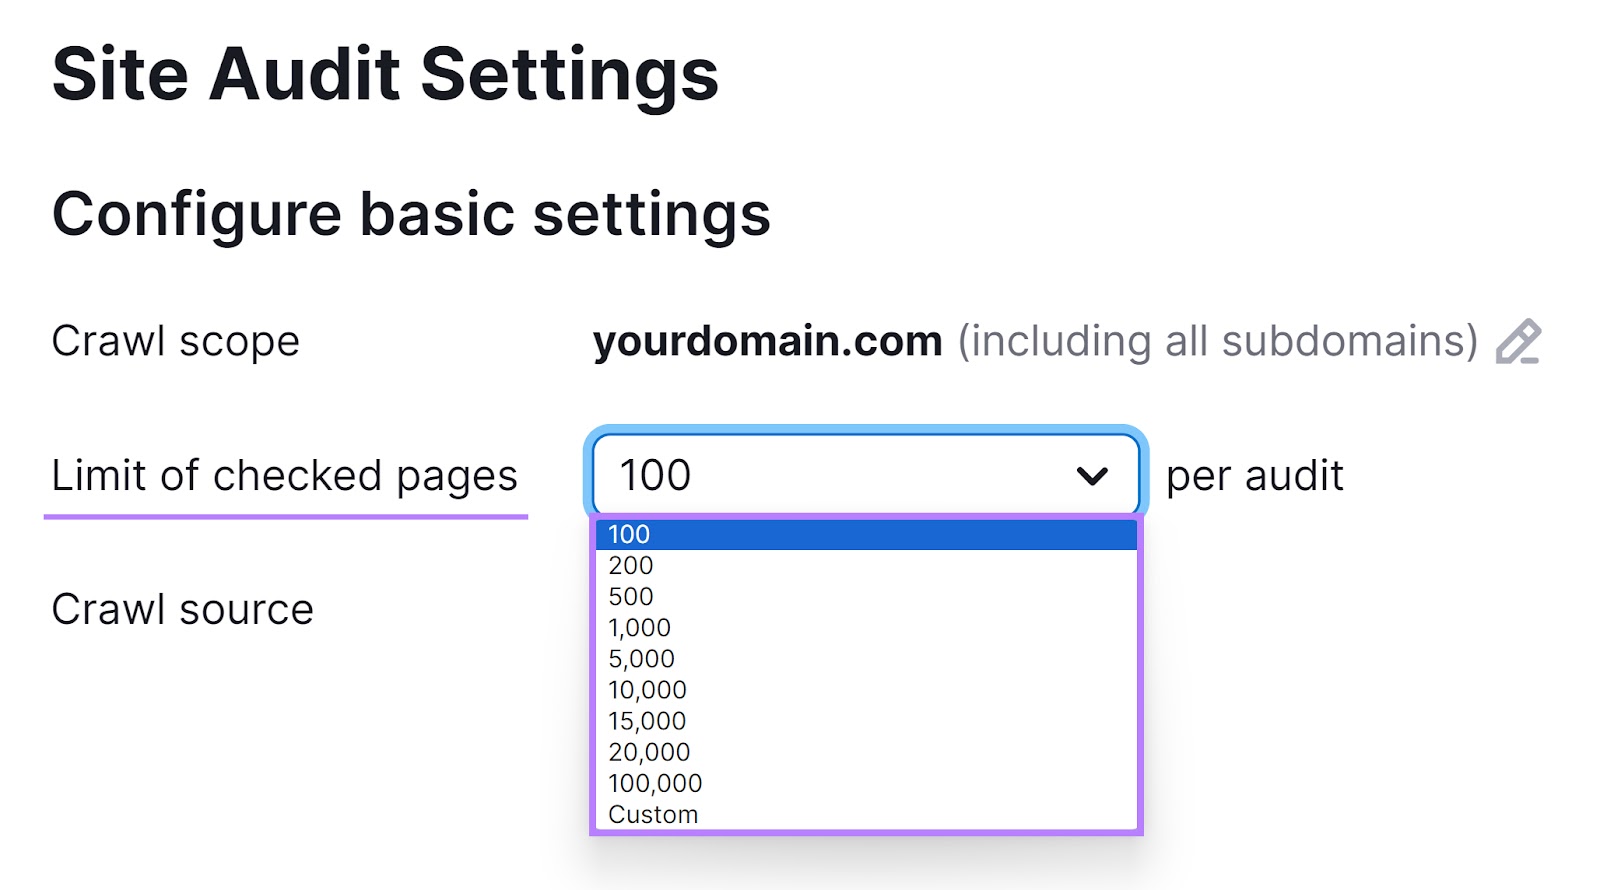 Site Audit Settings showing the "Limit of checked pages" drop-down menu.